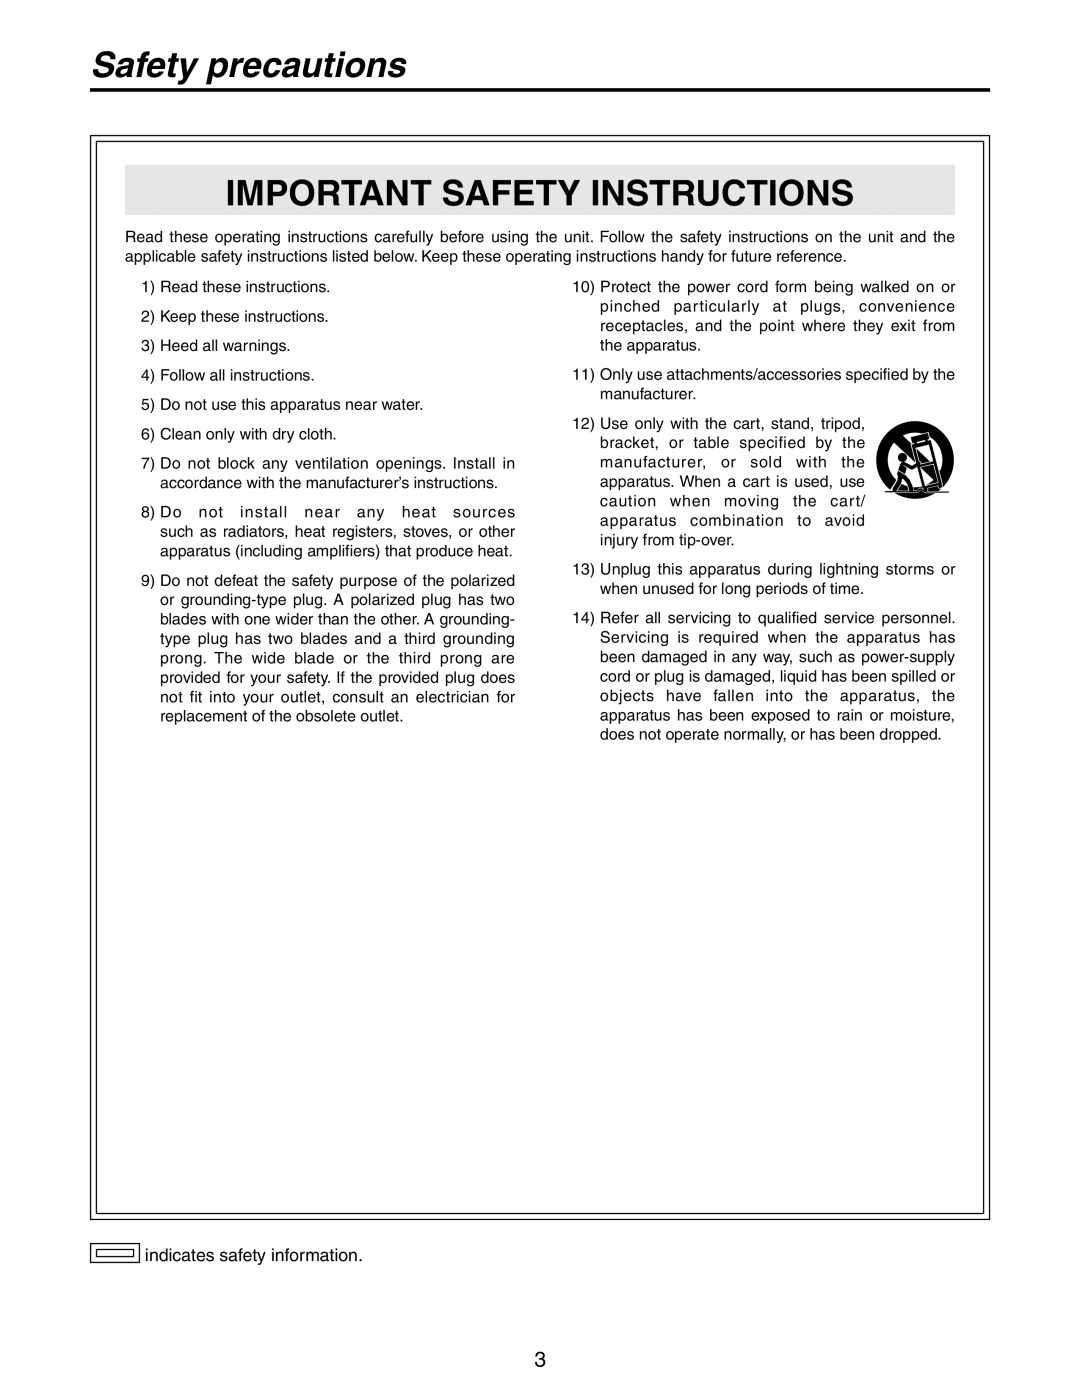 Panasonic AW-PH405N manual Important Safety Instructions, Safety precautions, indicates safety information 